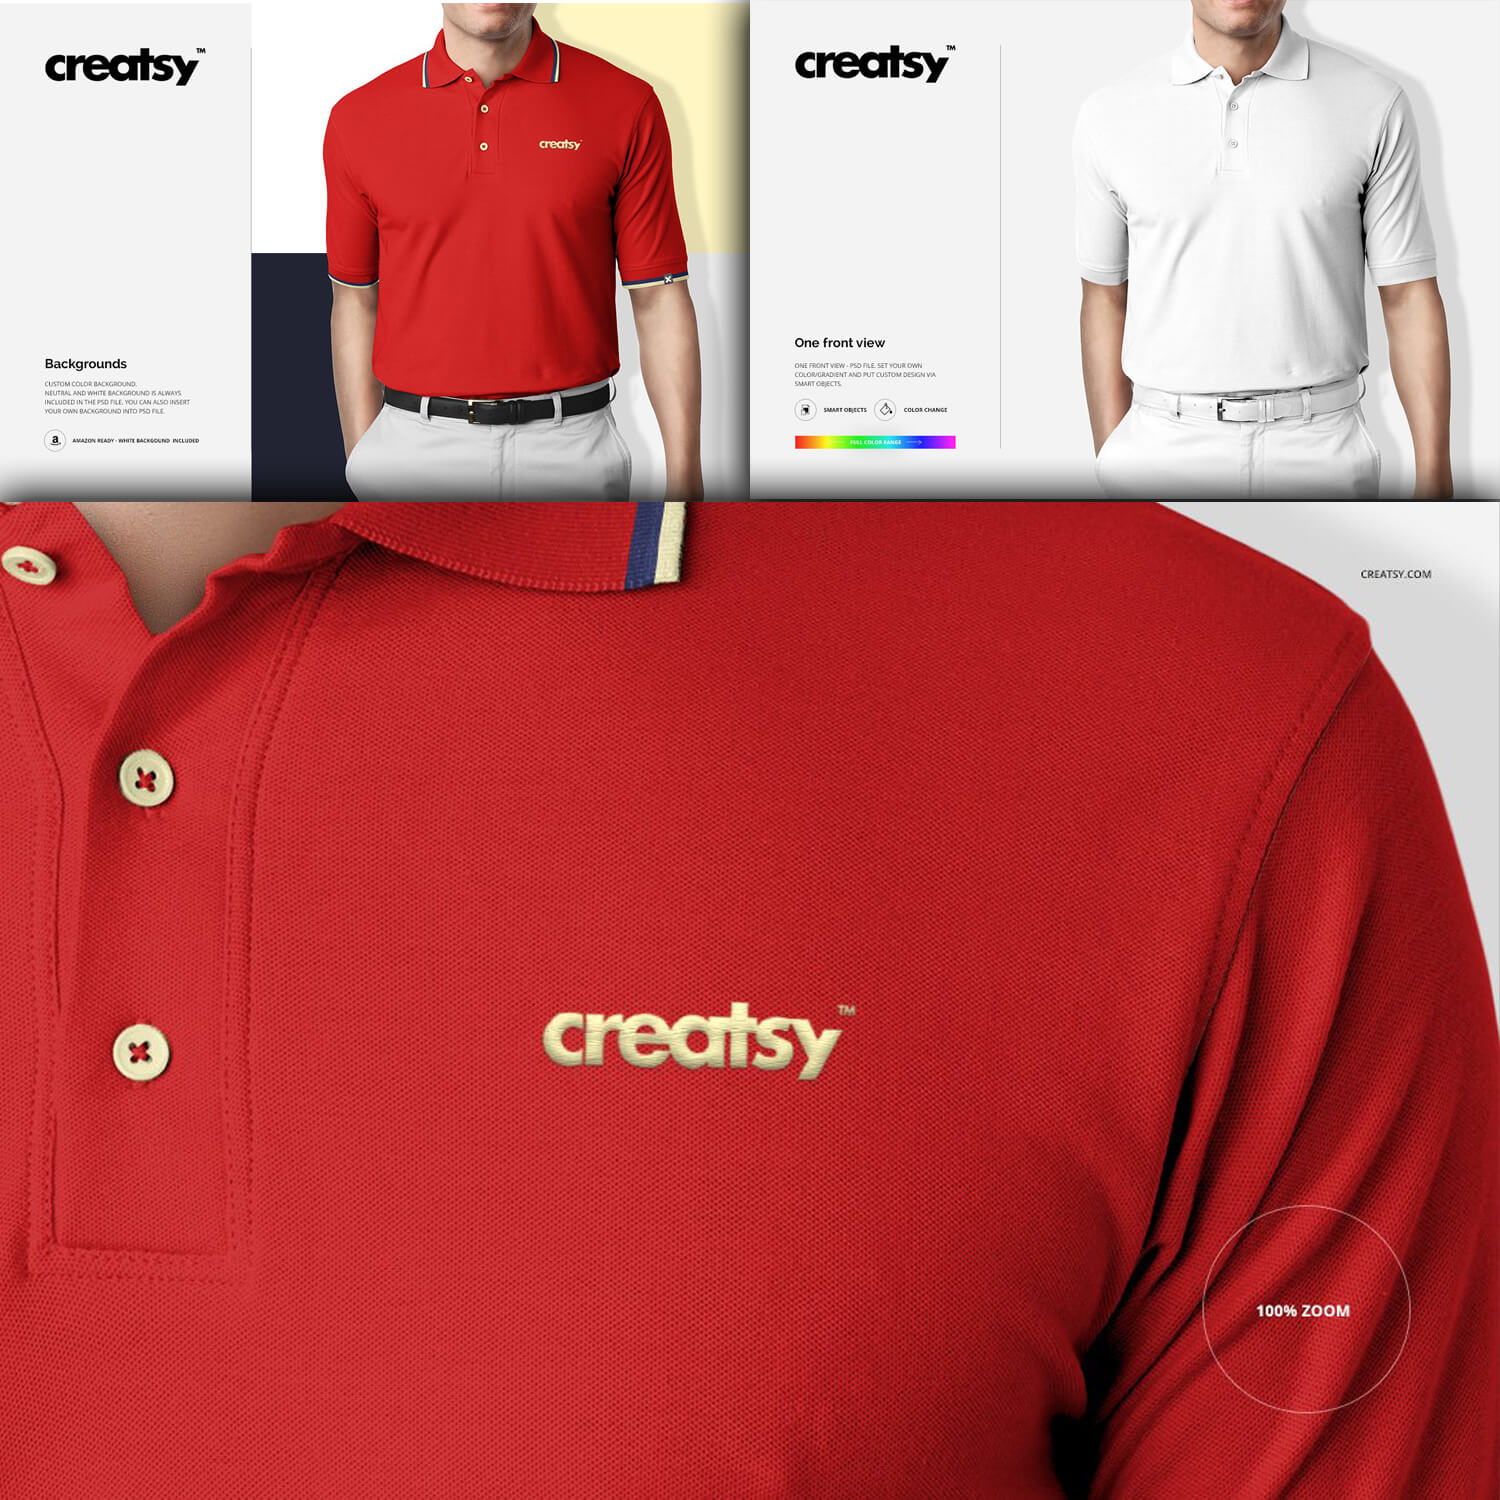 Large and small images of polo shirts.